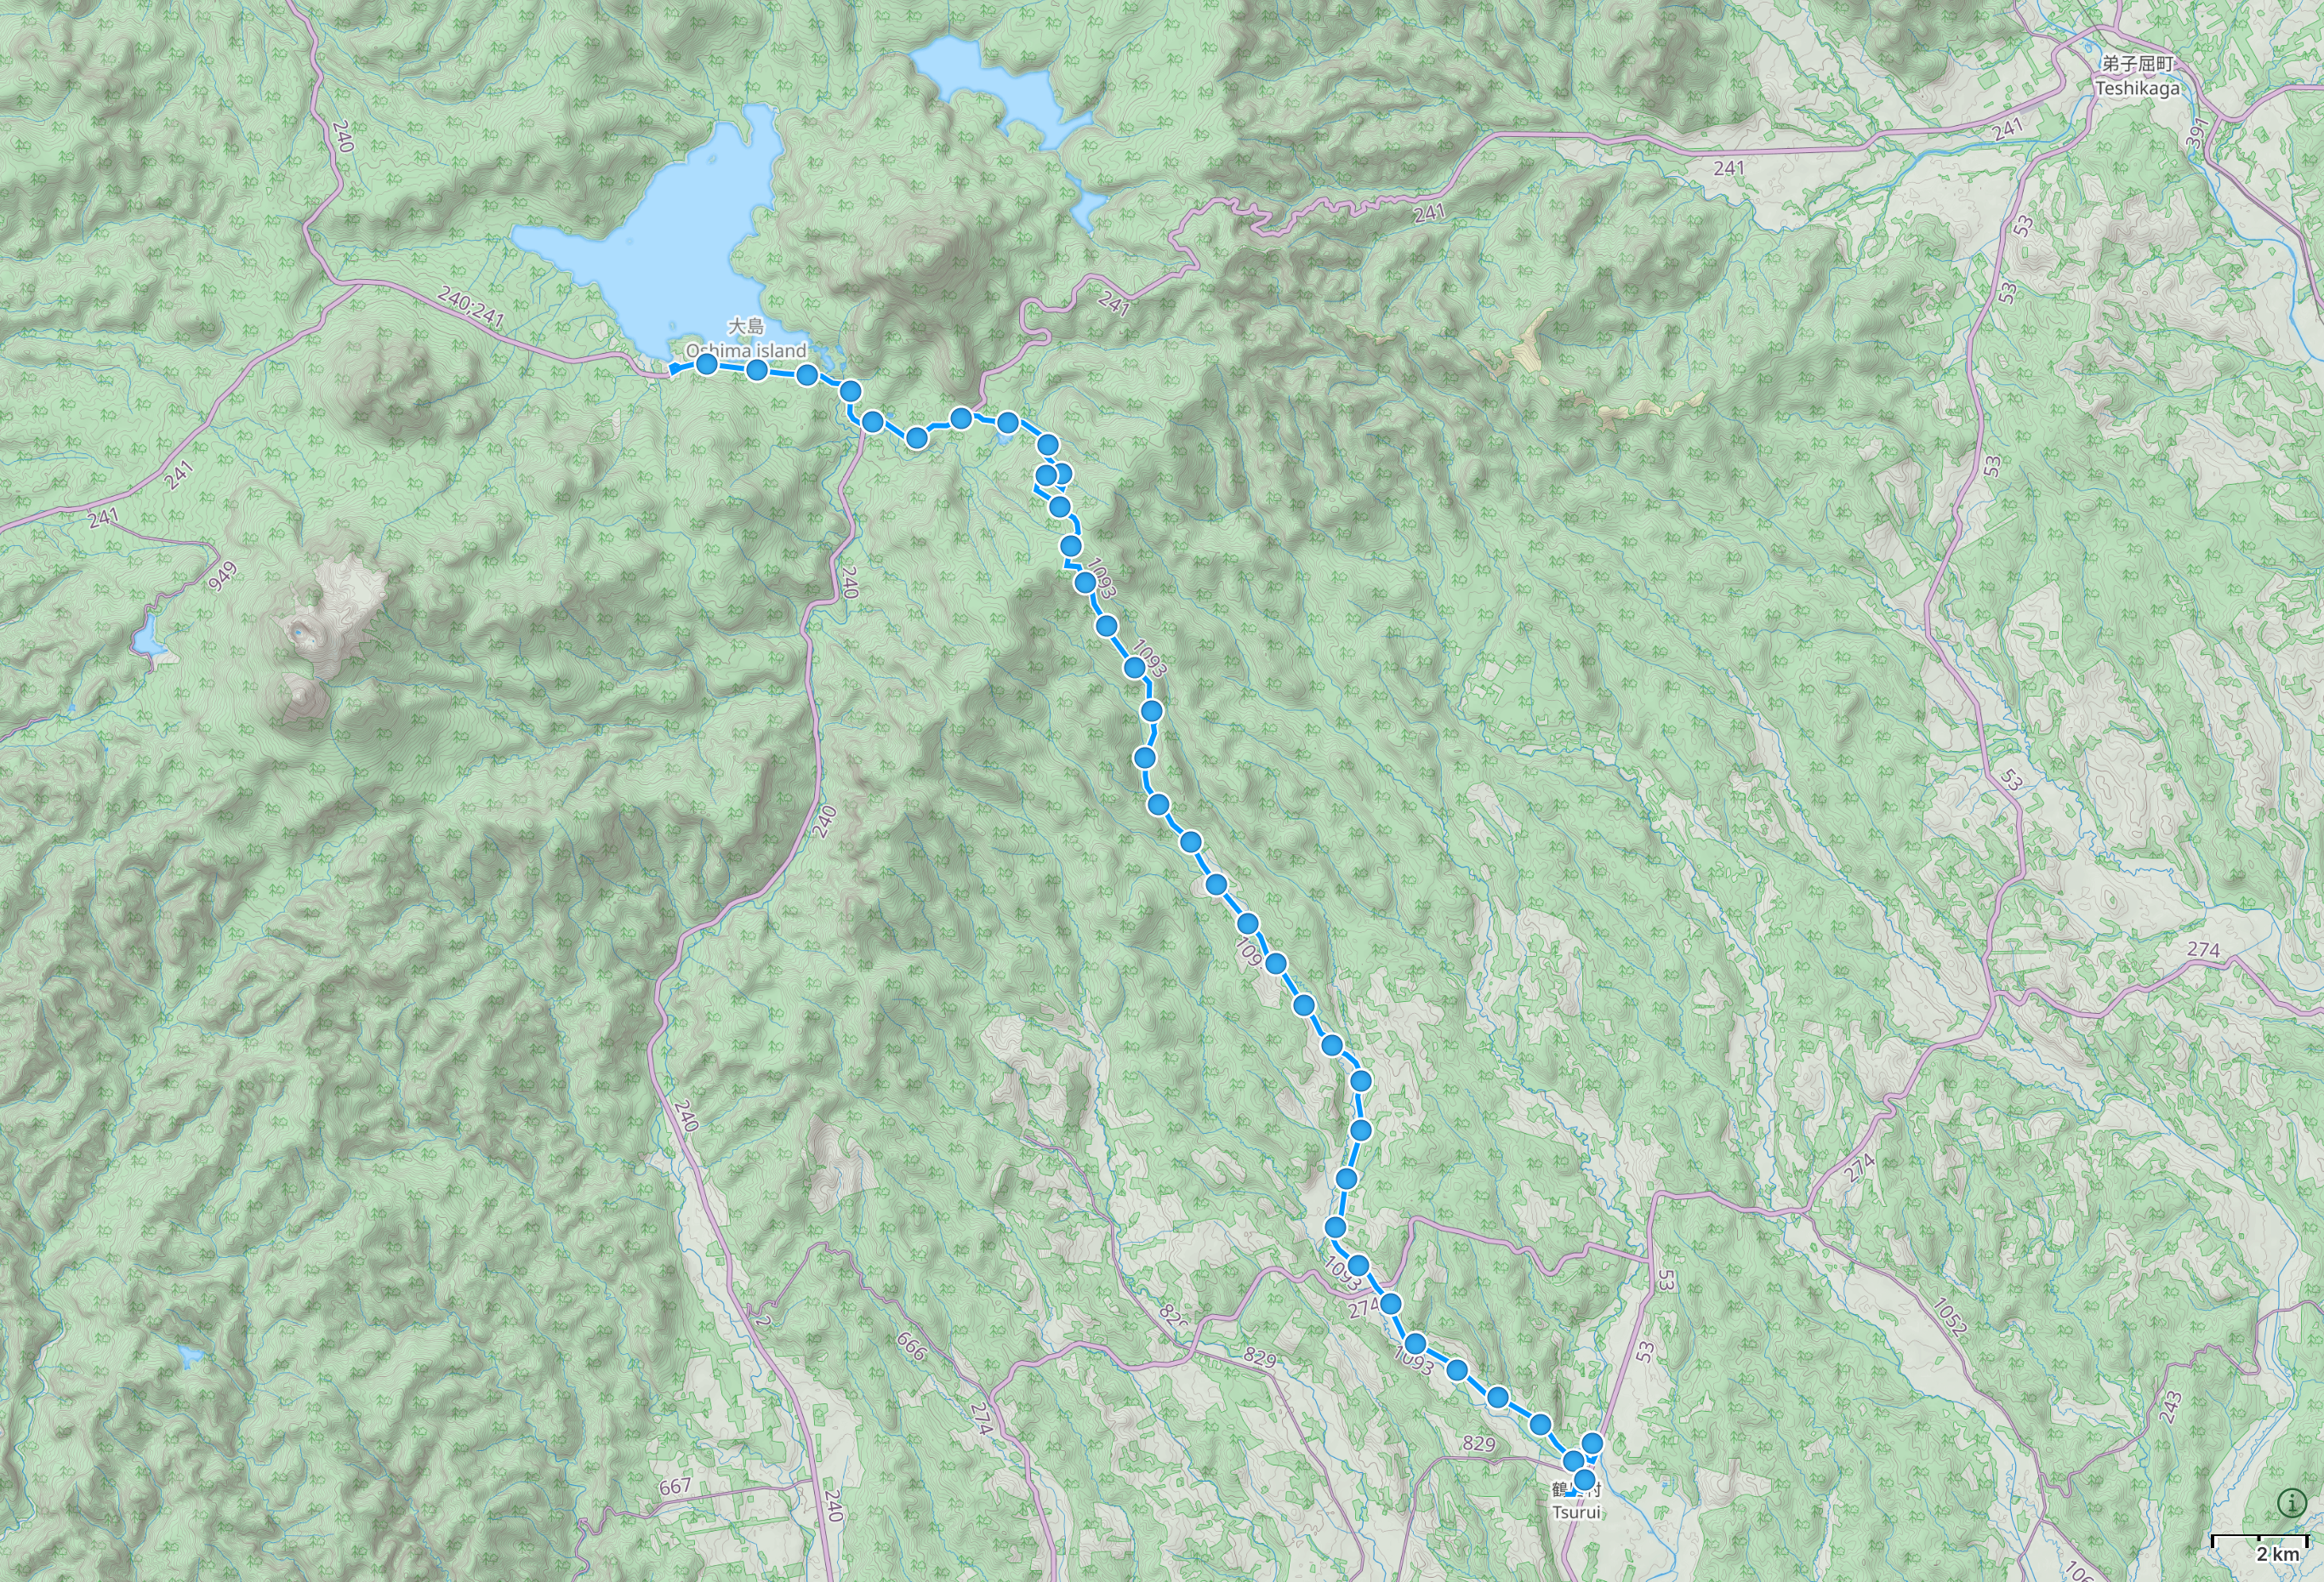 Map of Hokkaido with author’s route from Lake Akan Hot Spring to Tsurui highlighted.